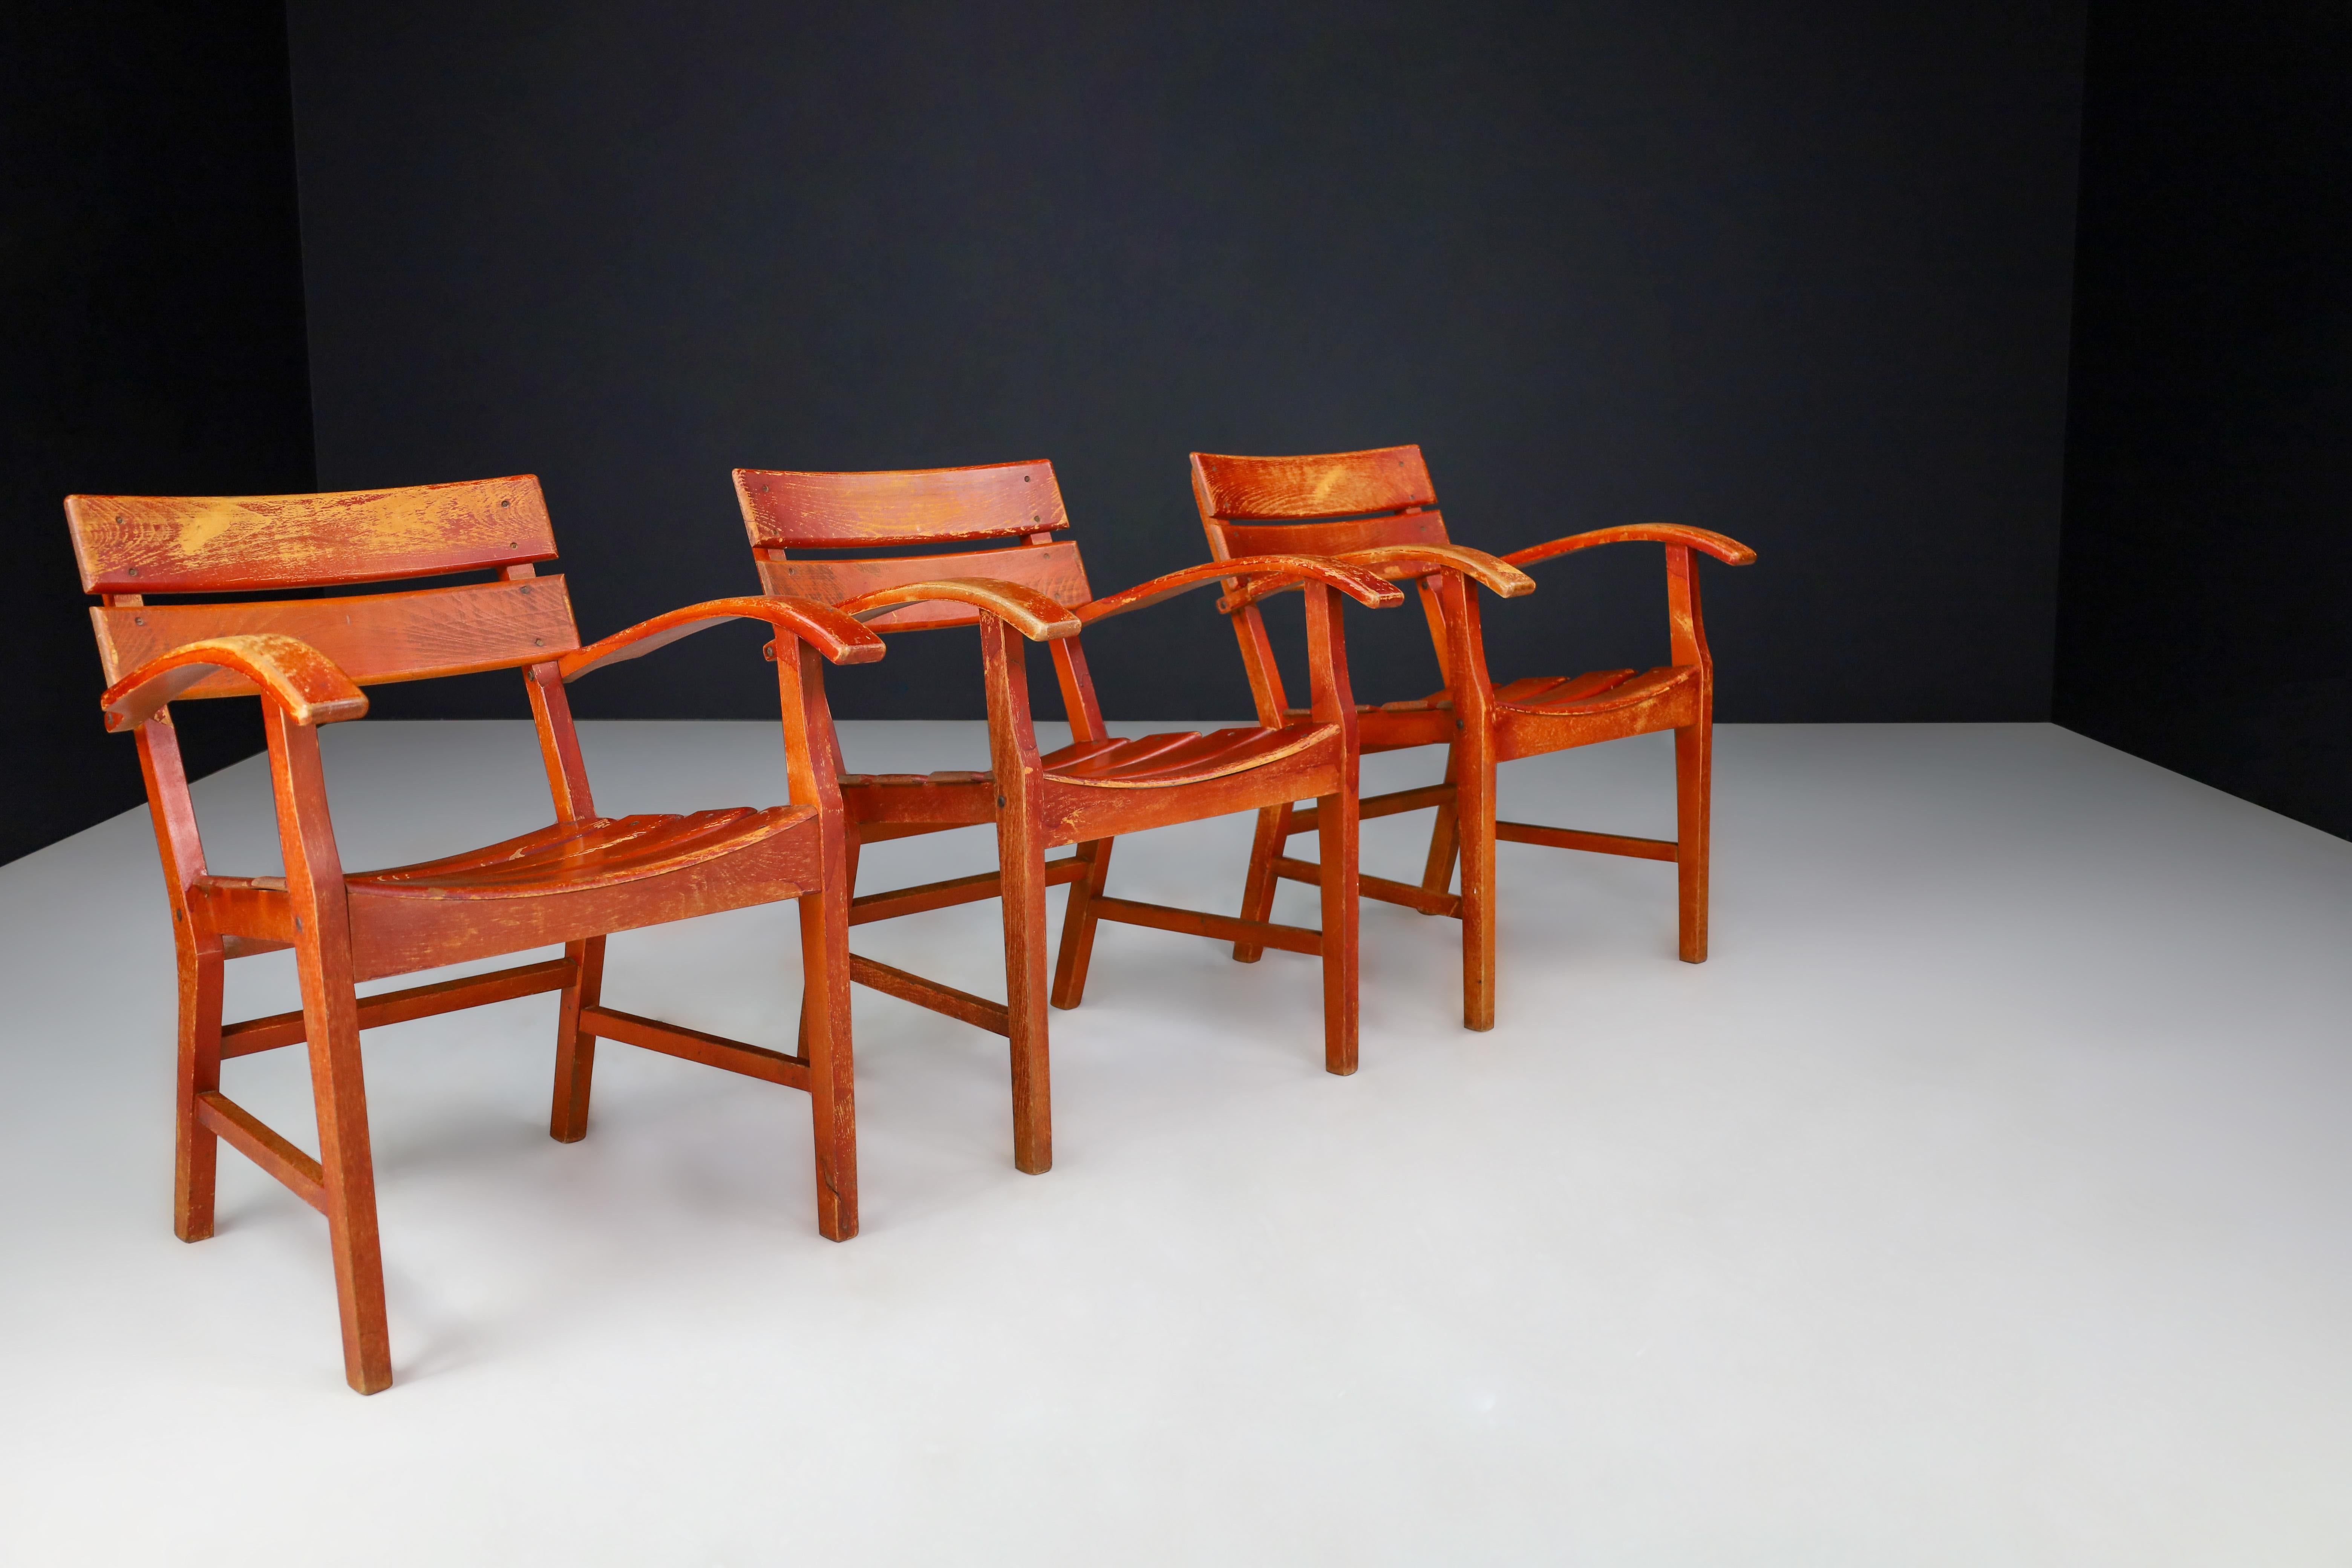 20th Century Midcentury Patinated French Oak Garden Armchairs, France 1950s For Sale